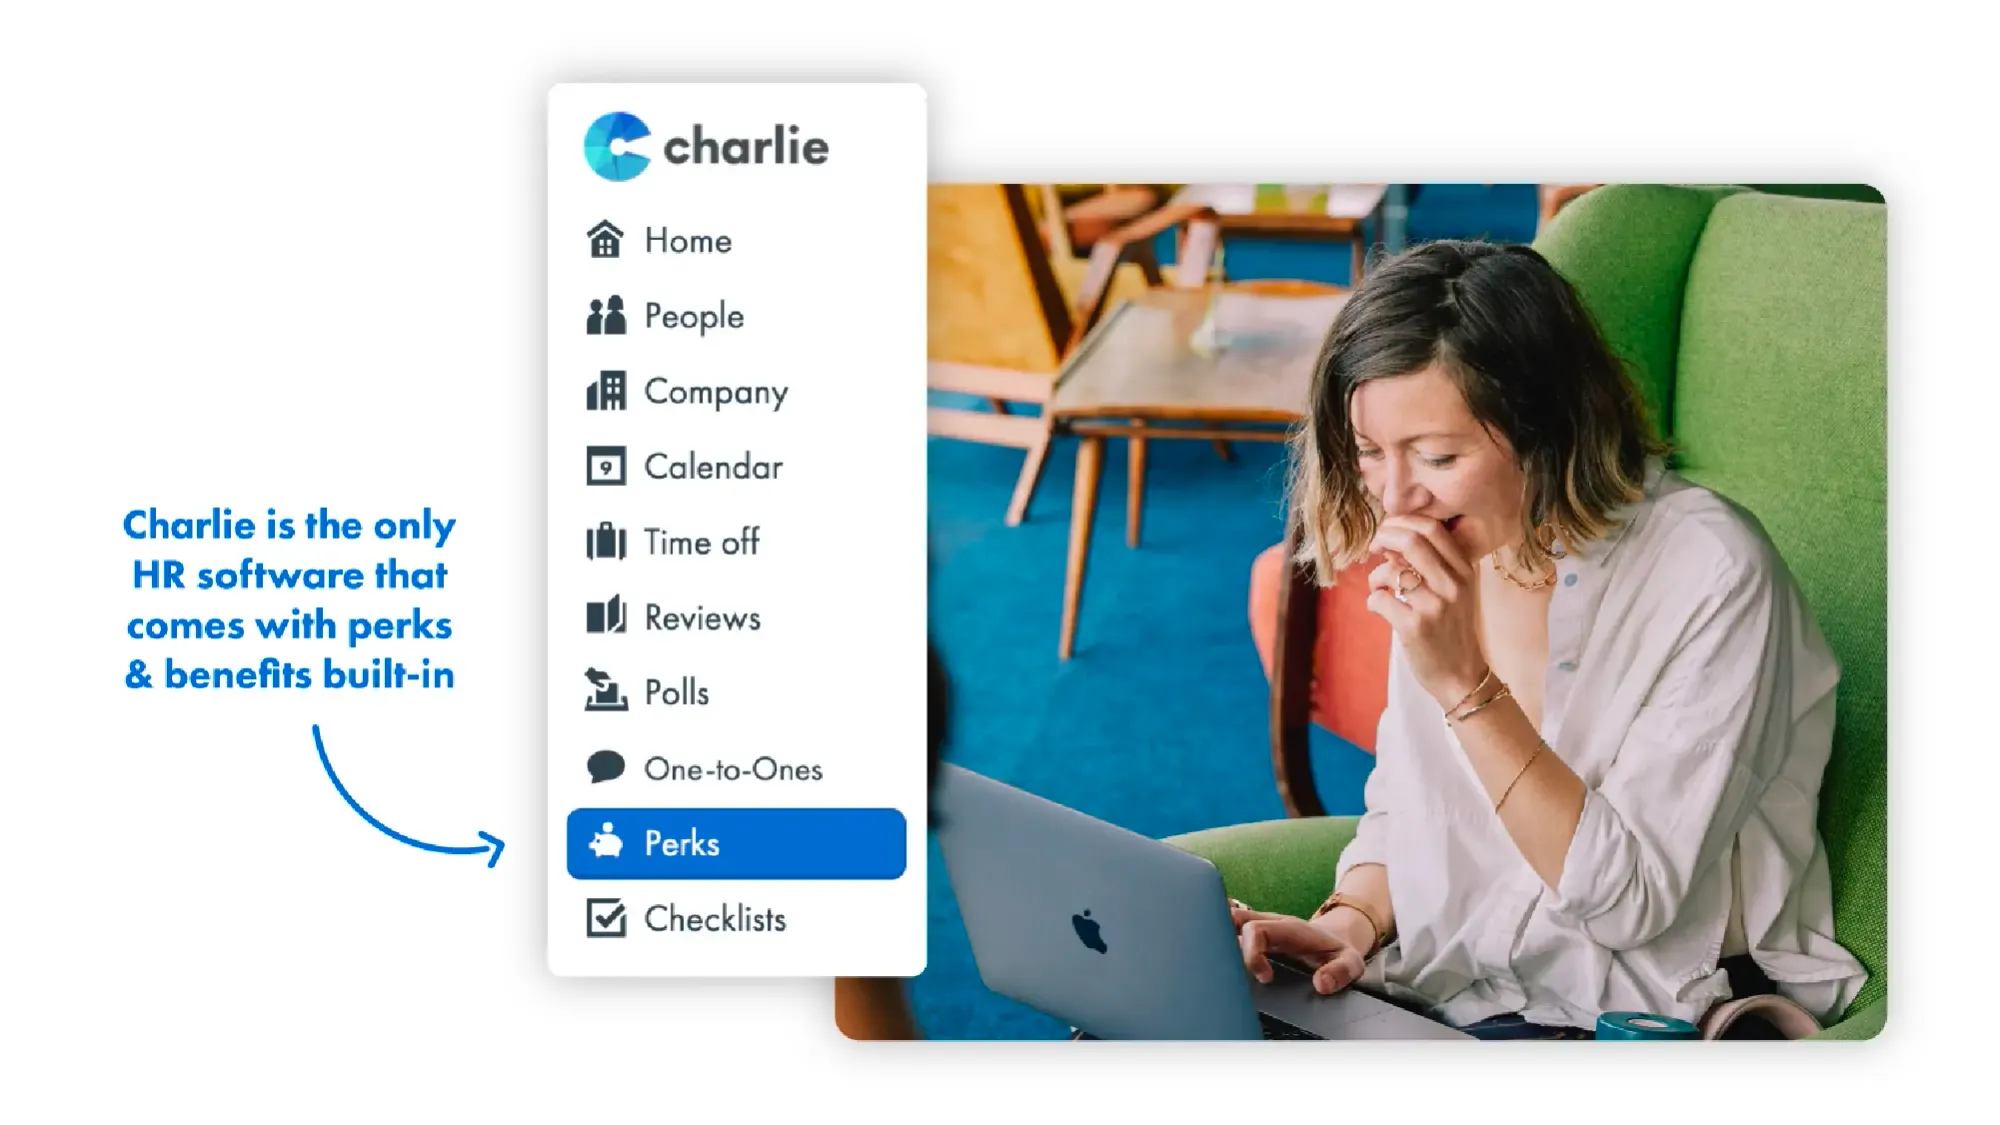 Charlie offers a complete employee perks platform for free!